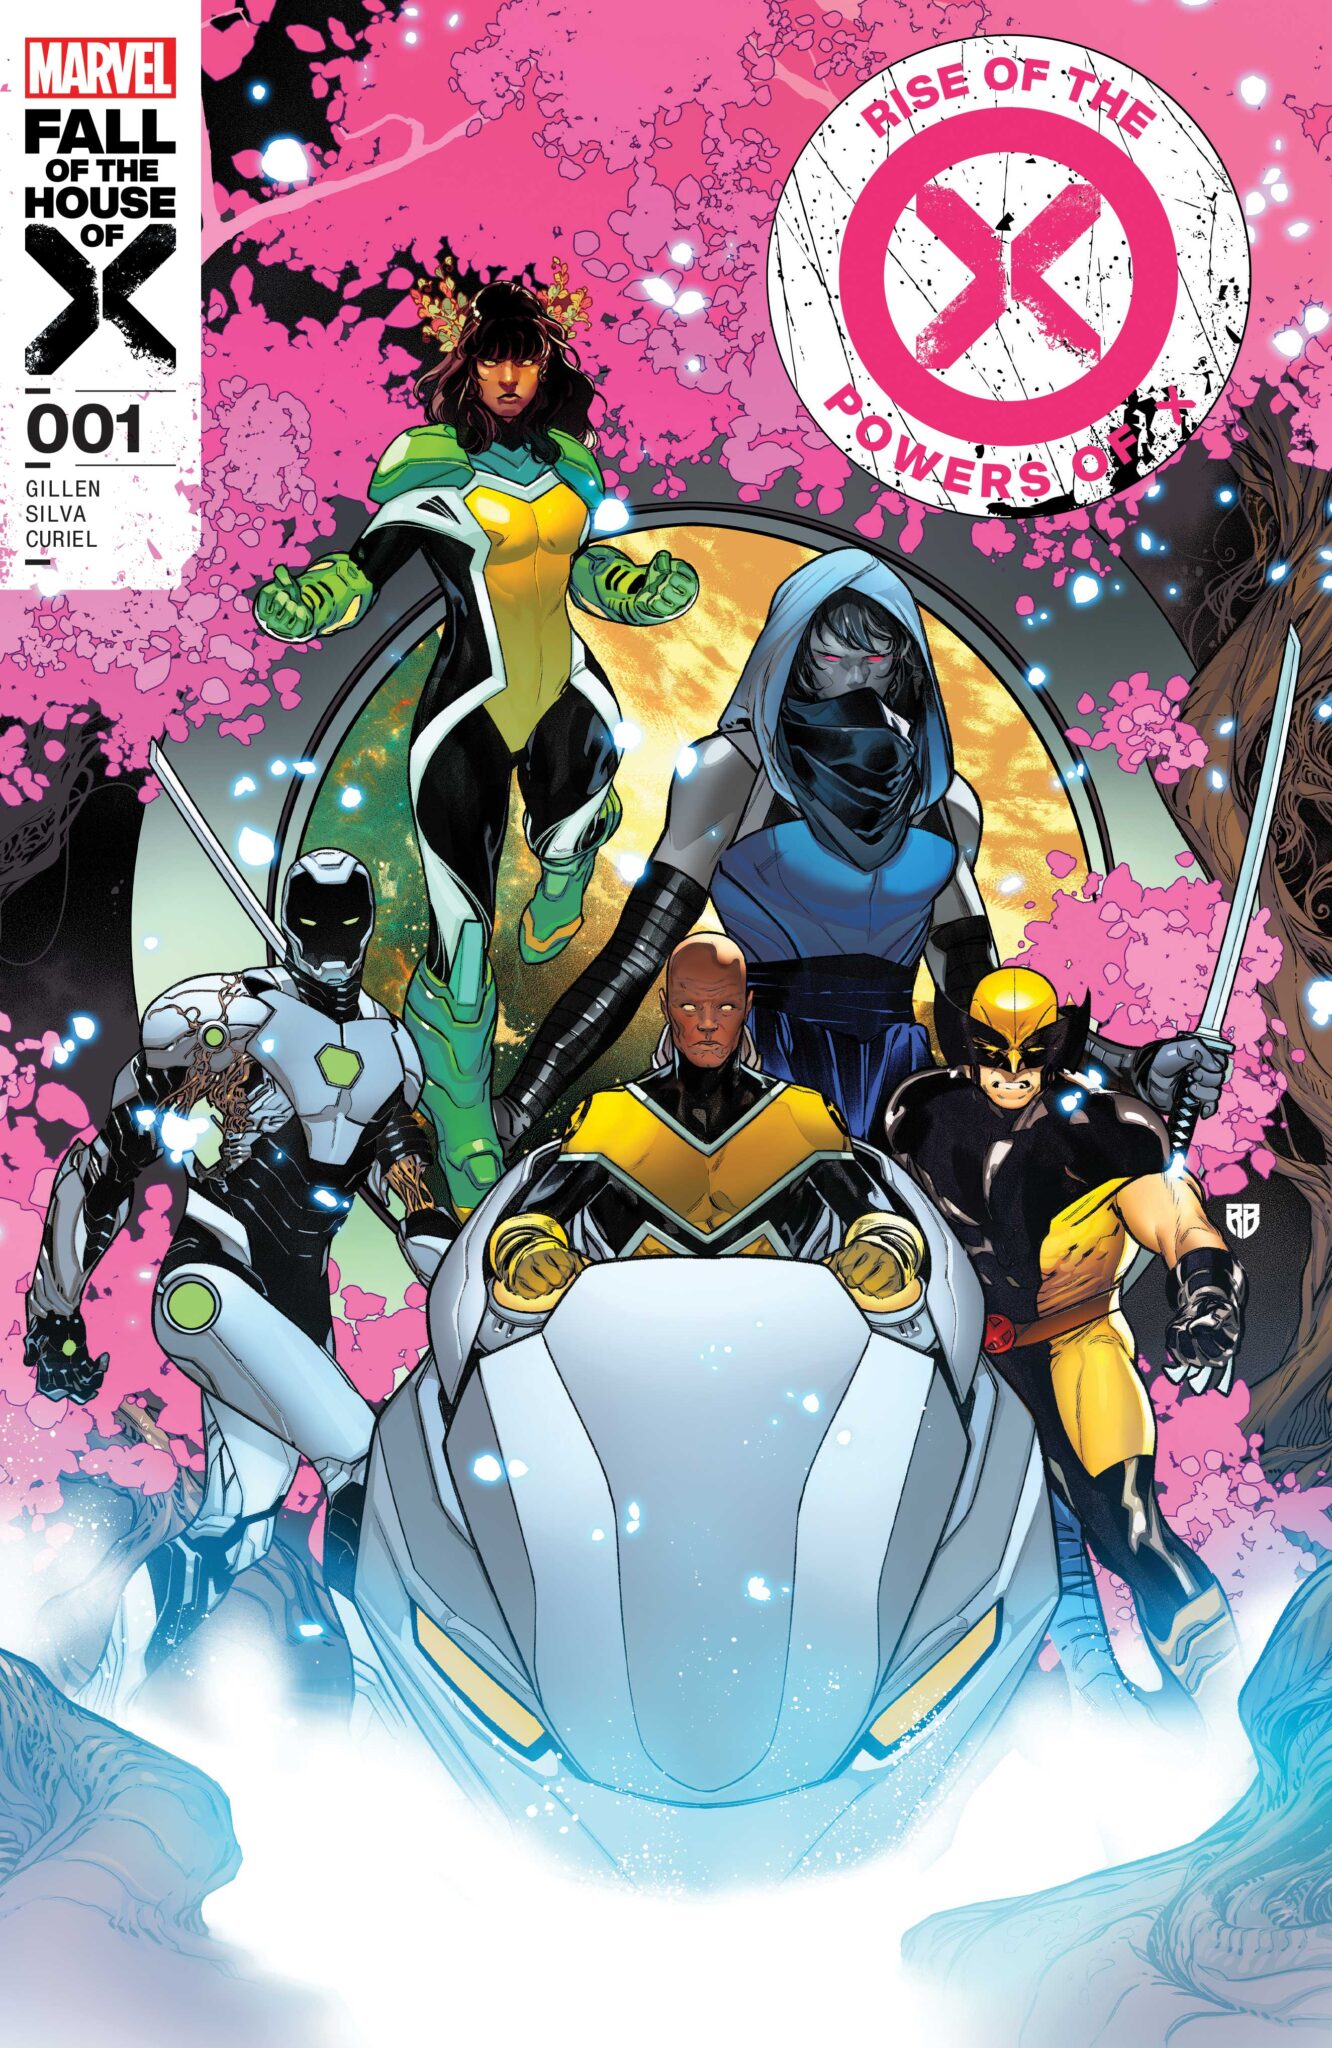 Rise of the Powers of X #1 cover